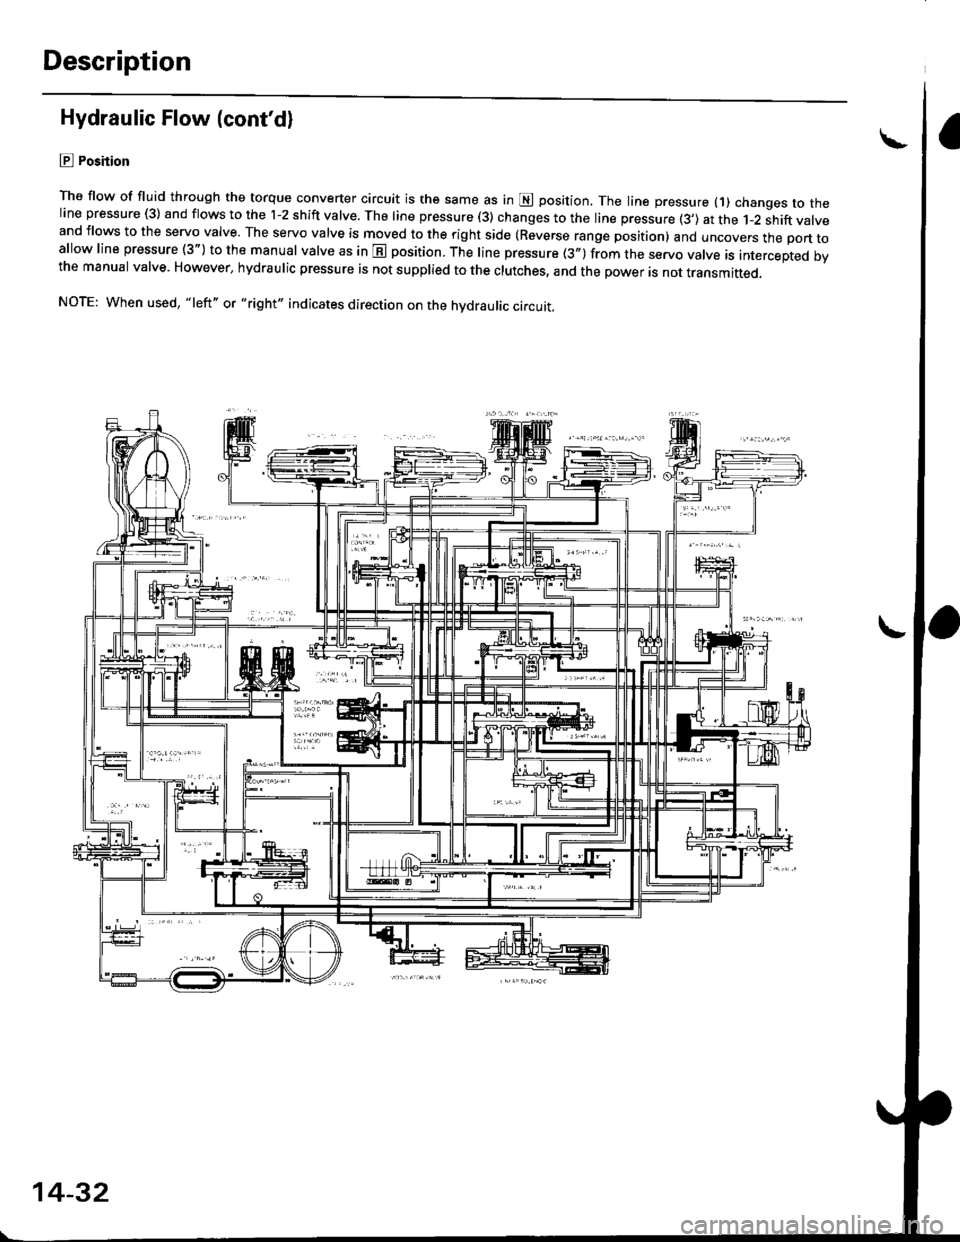 HONDA CIVIC 1998 6.G Workshop Manual Description
Hydraulic Flow (contd)
lll Position
The flow of fluid through the torque converter circuit is the same as in E position. The line pressure (1) changes to theline pressure (3) and flows to